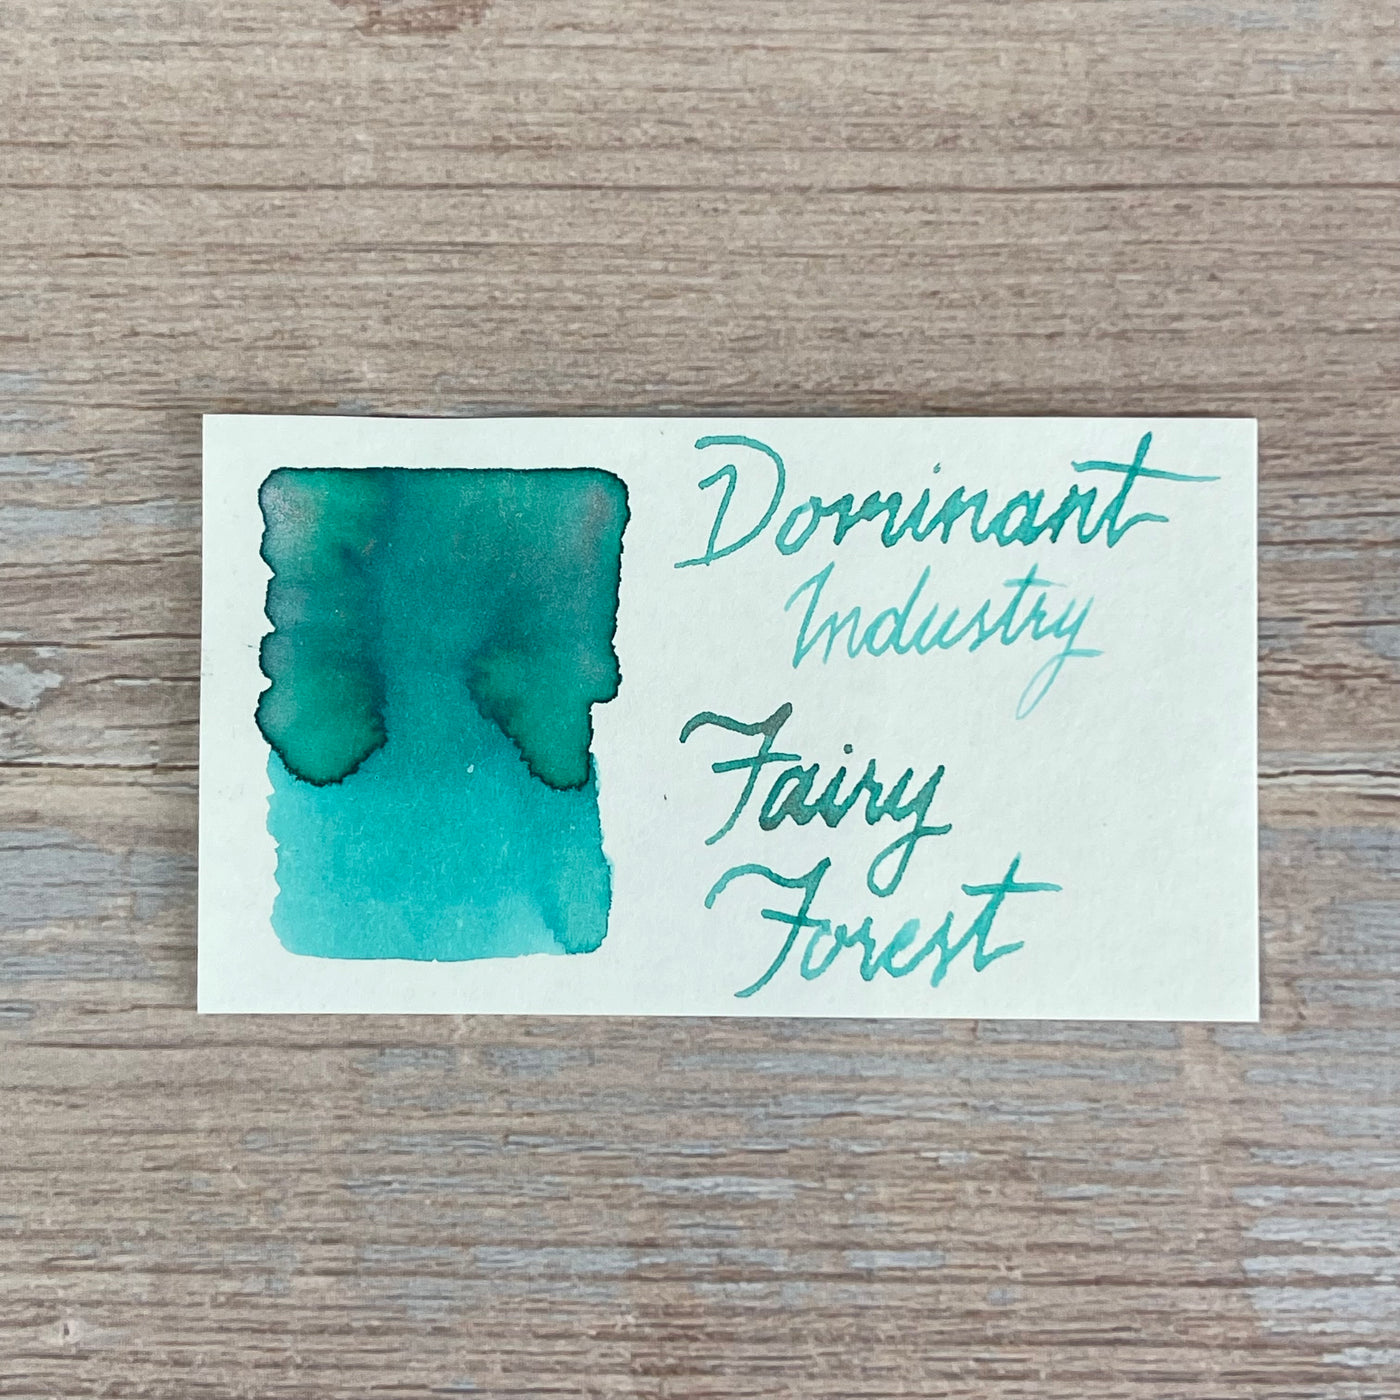 Dominant Industry Fairy Forest - 25ml Bottled Ink